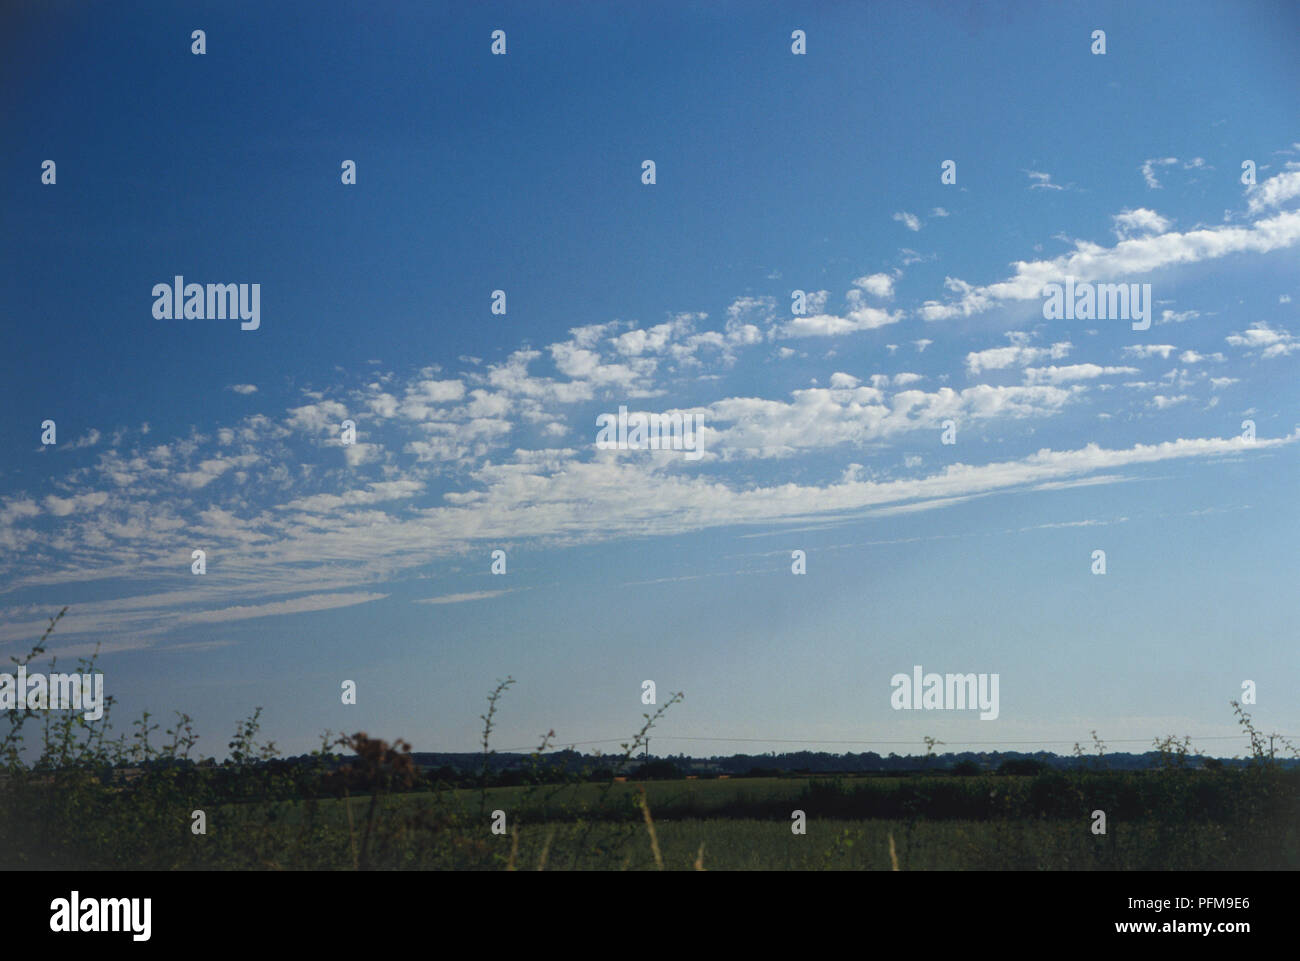 Altocumulus castellanus clouds, thin tufts in parallel lines forming band in blue sky, fields of countryside below. Stock Photo